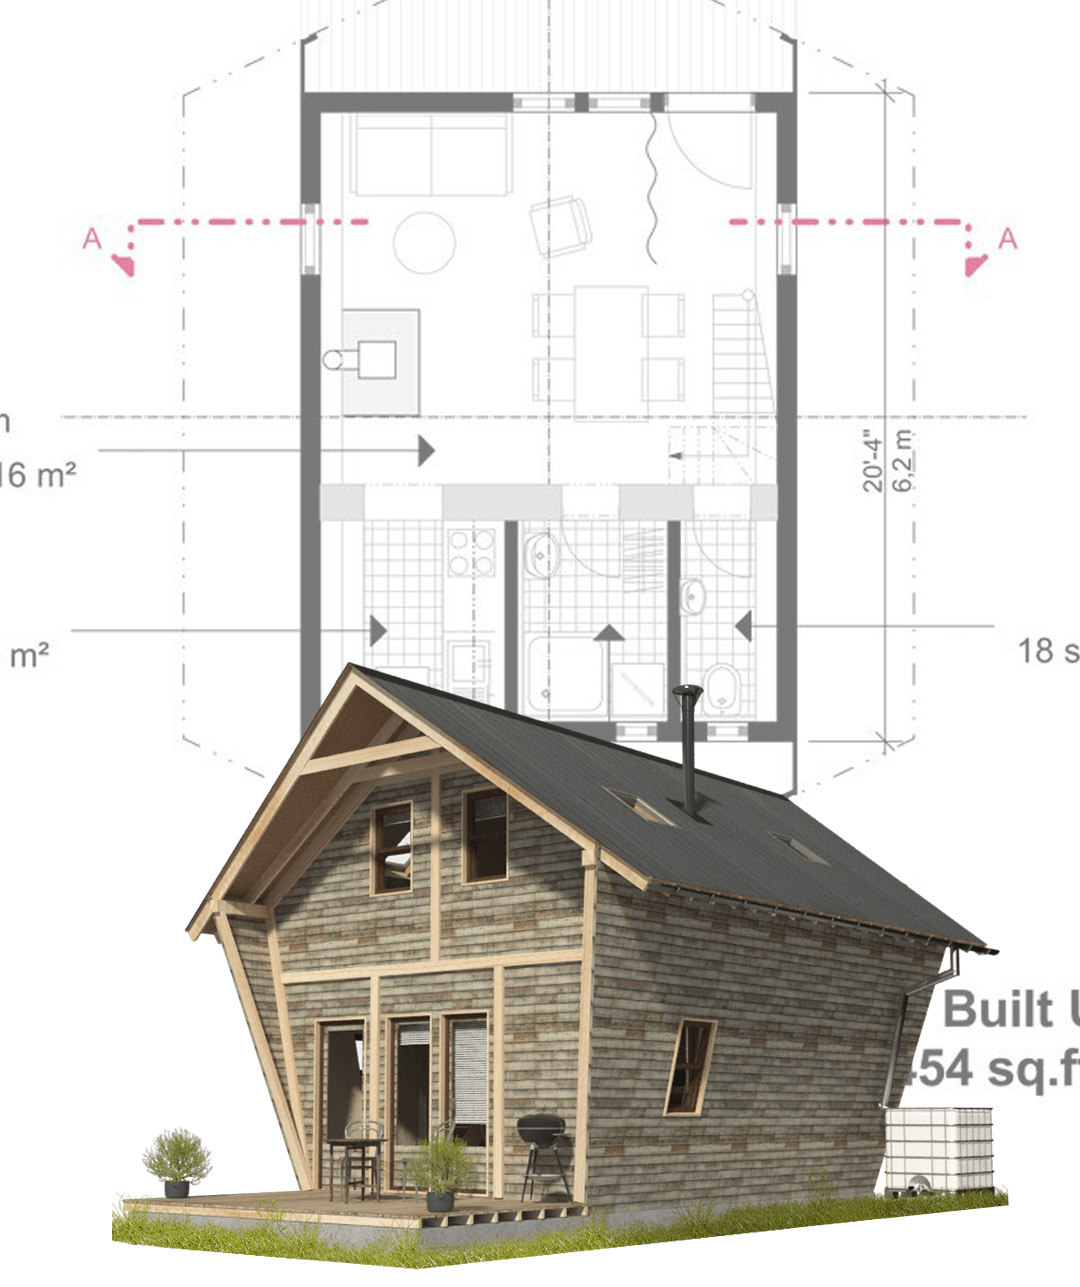 2-bedroom shed house plans